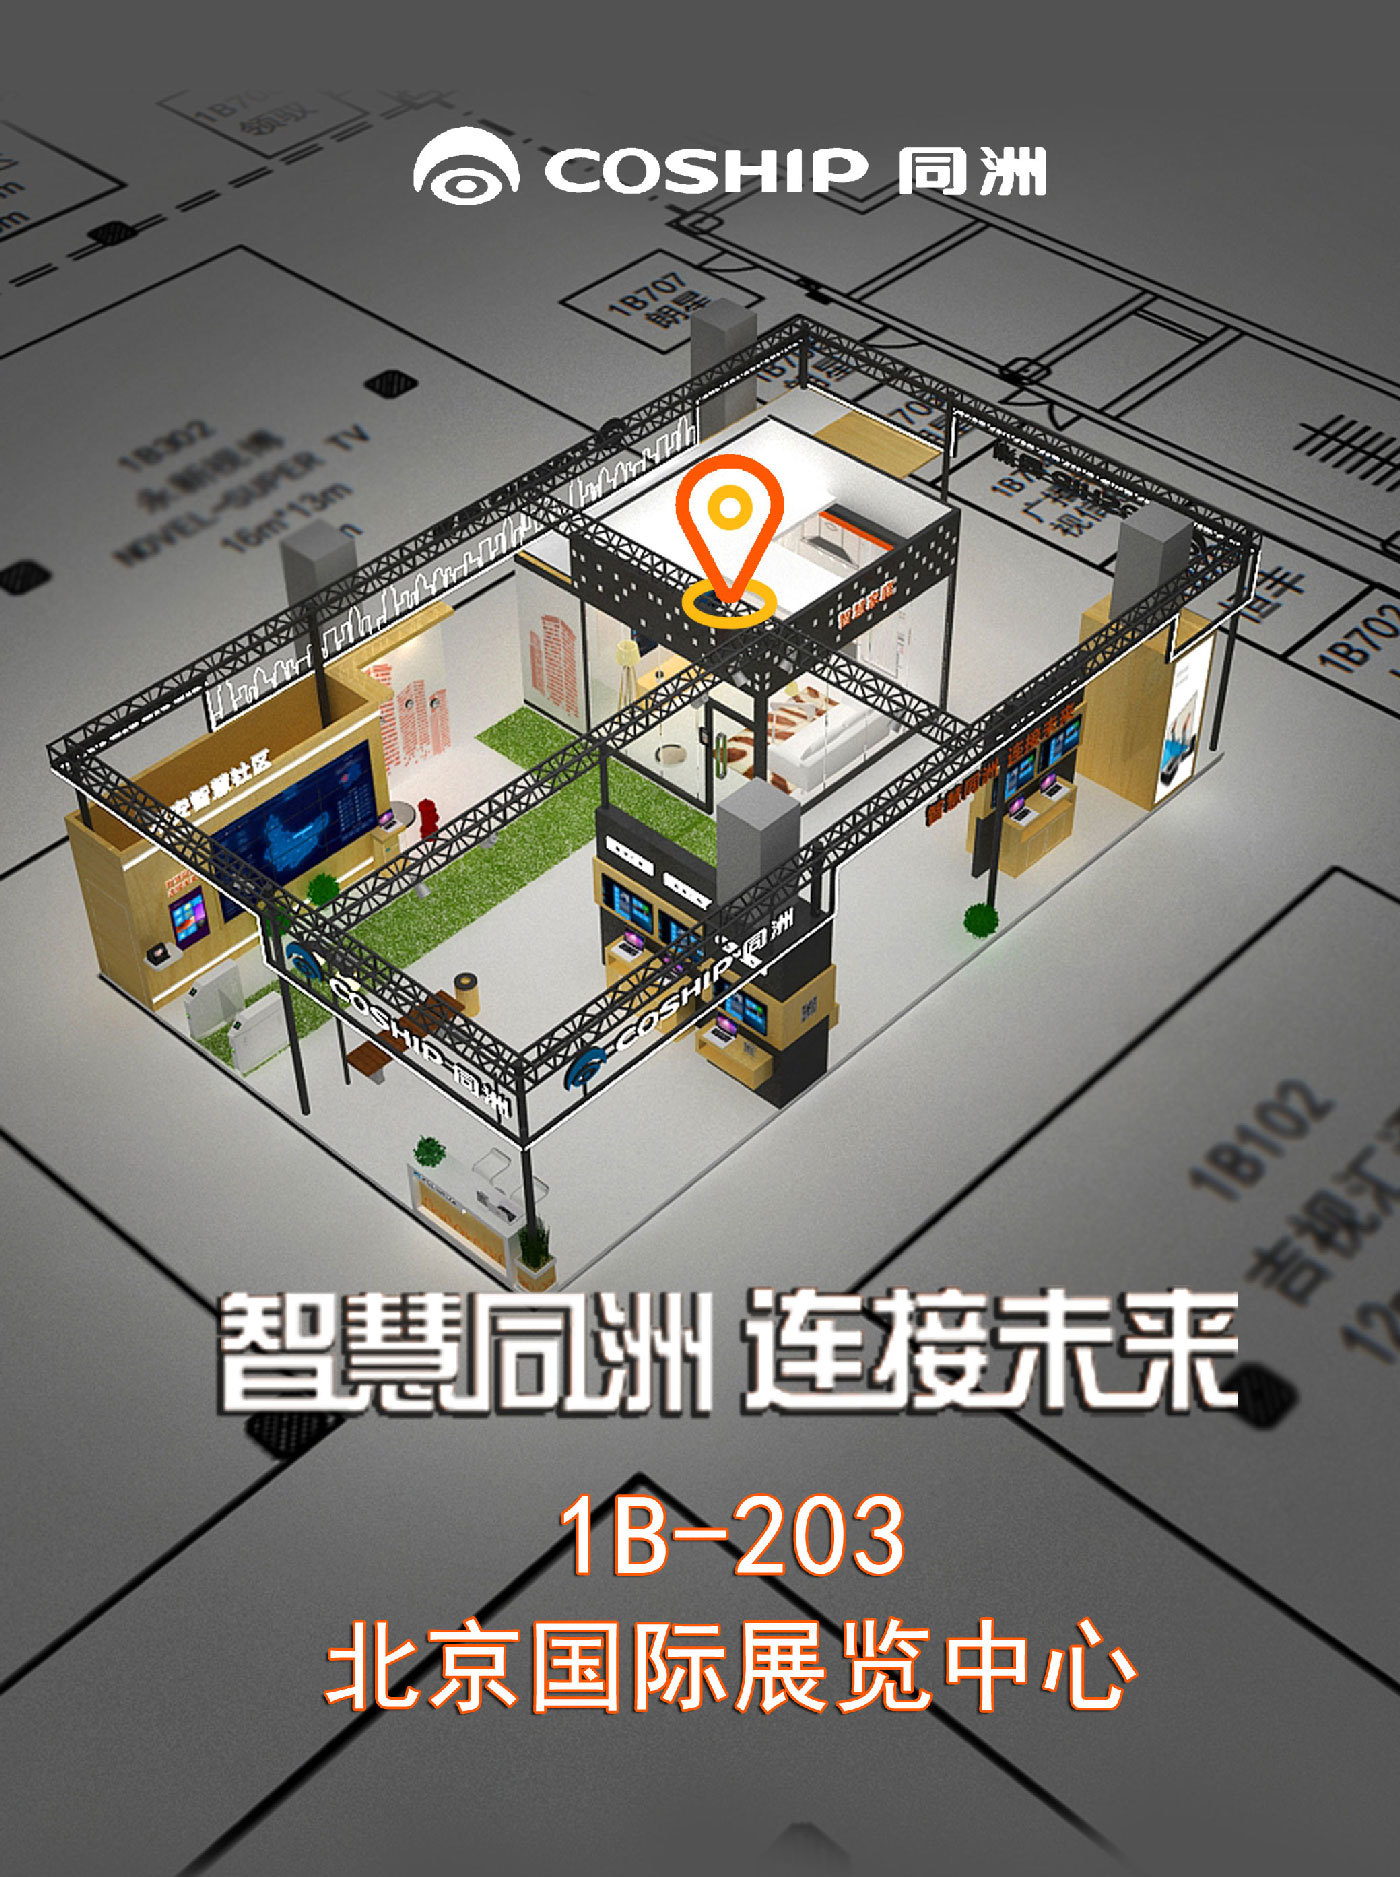 Meet for 19 years｜CCBN2019, Tongzhou empowers radio and television with new value of "wisdom"!